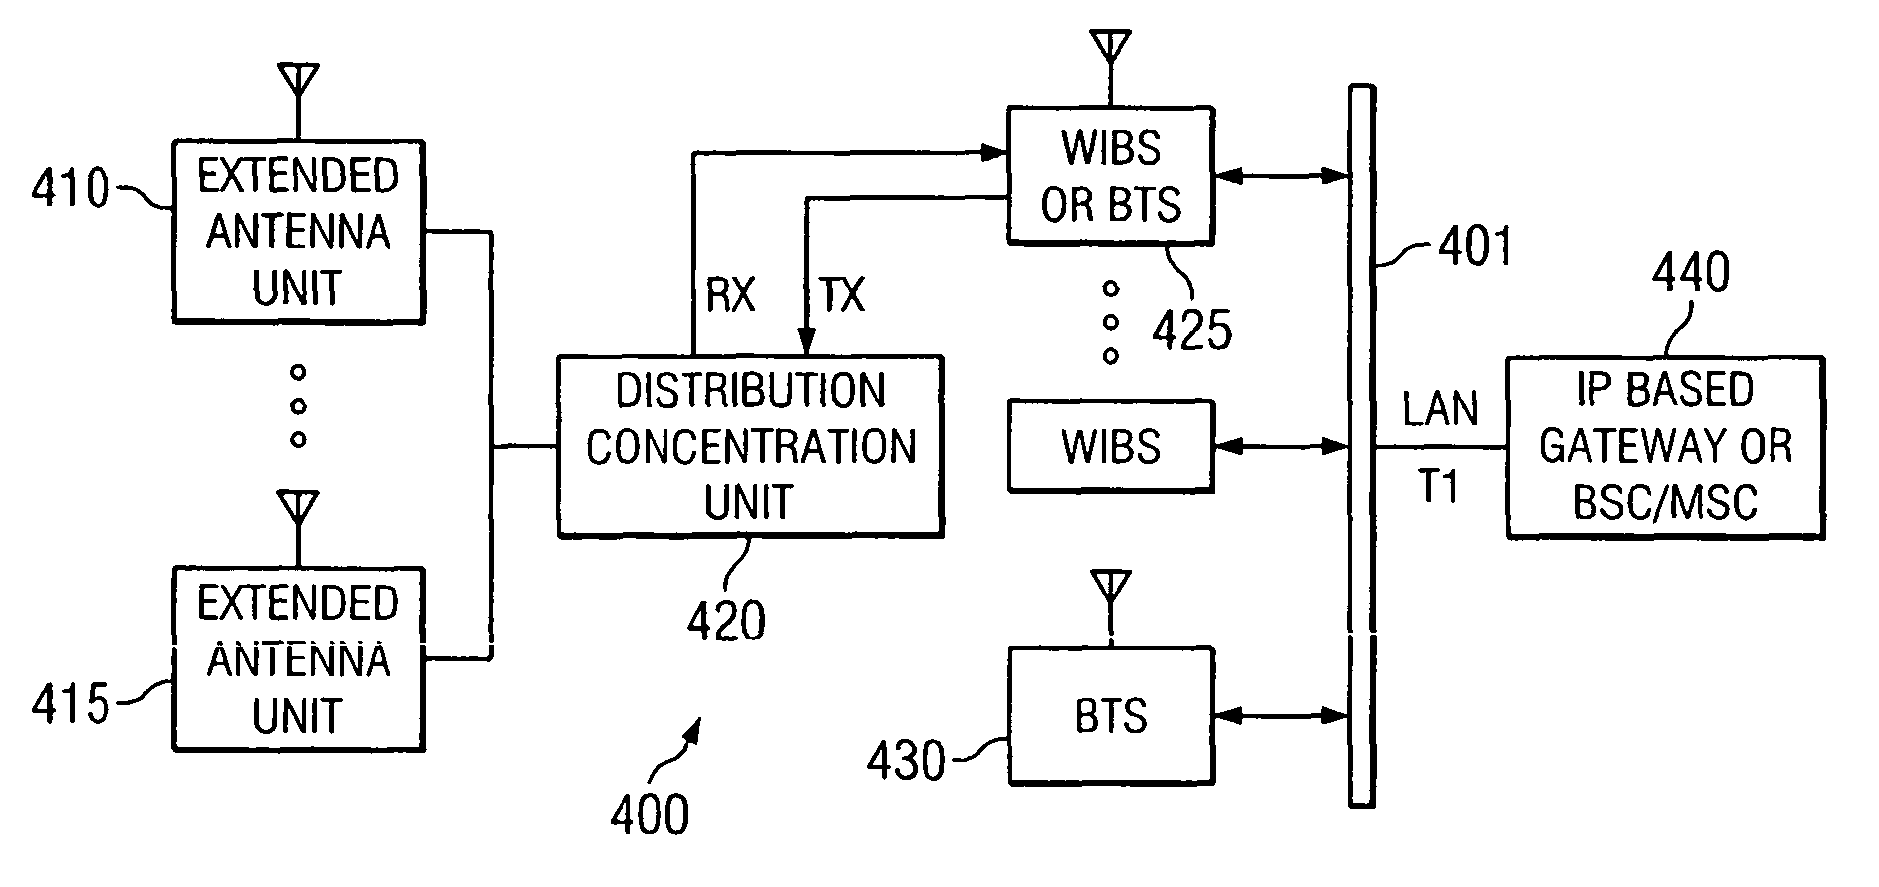 Handoff control in an enterprise division multiple access wireless system